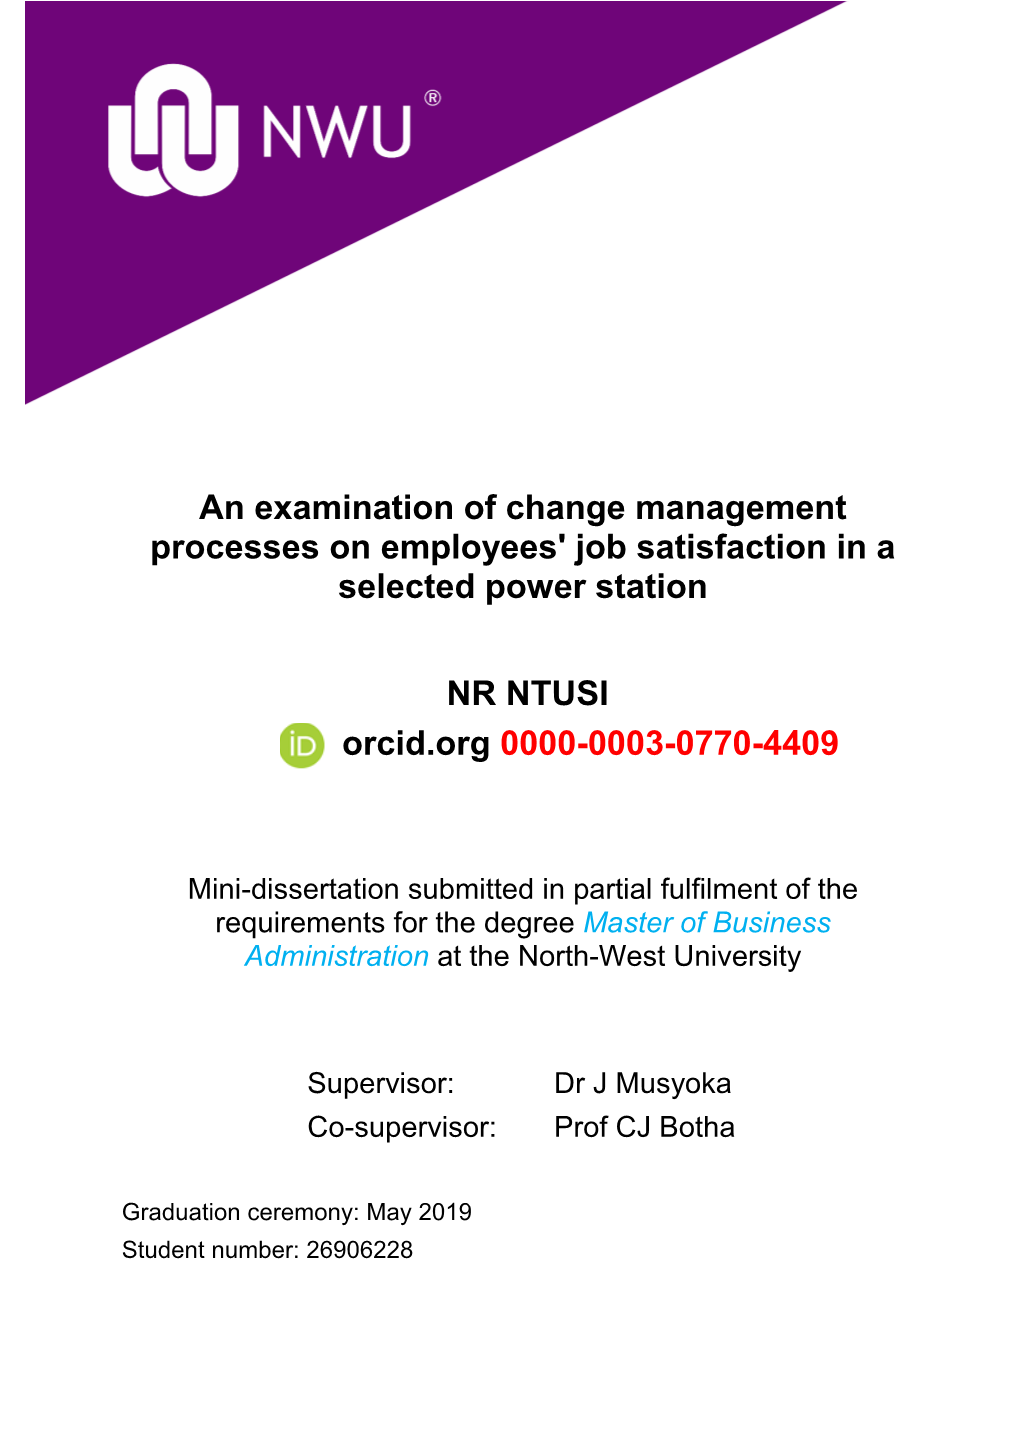 An Examination of Change Management Processes on Employees' Job Satisfaction in a Selected Power Station NR NTUSI Orcid.Org 0000